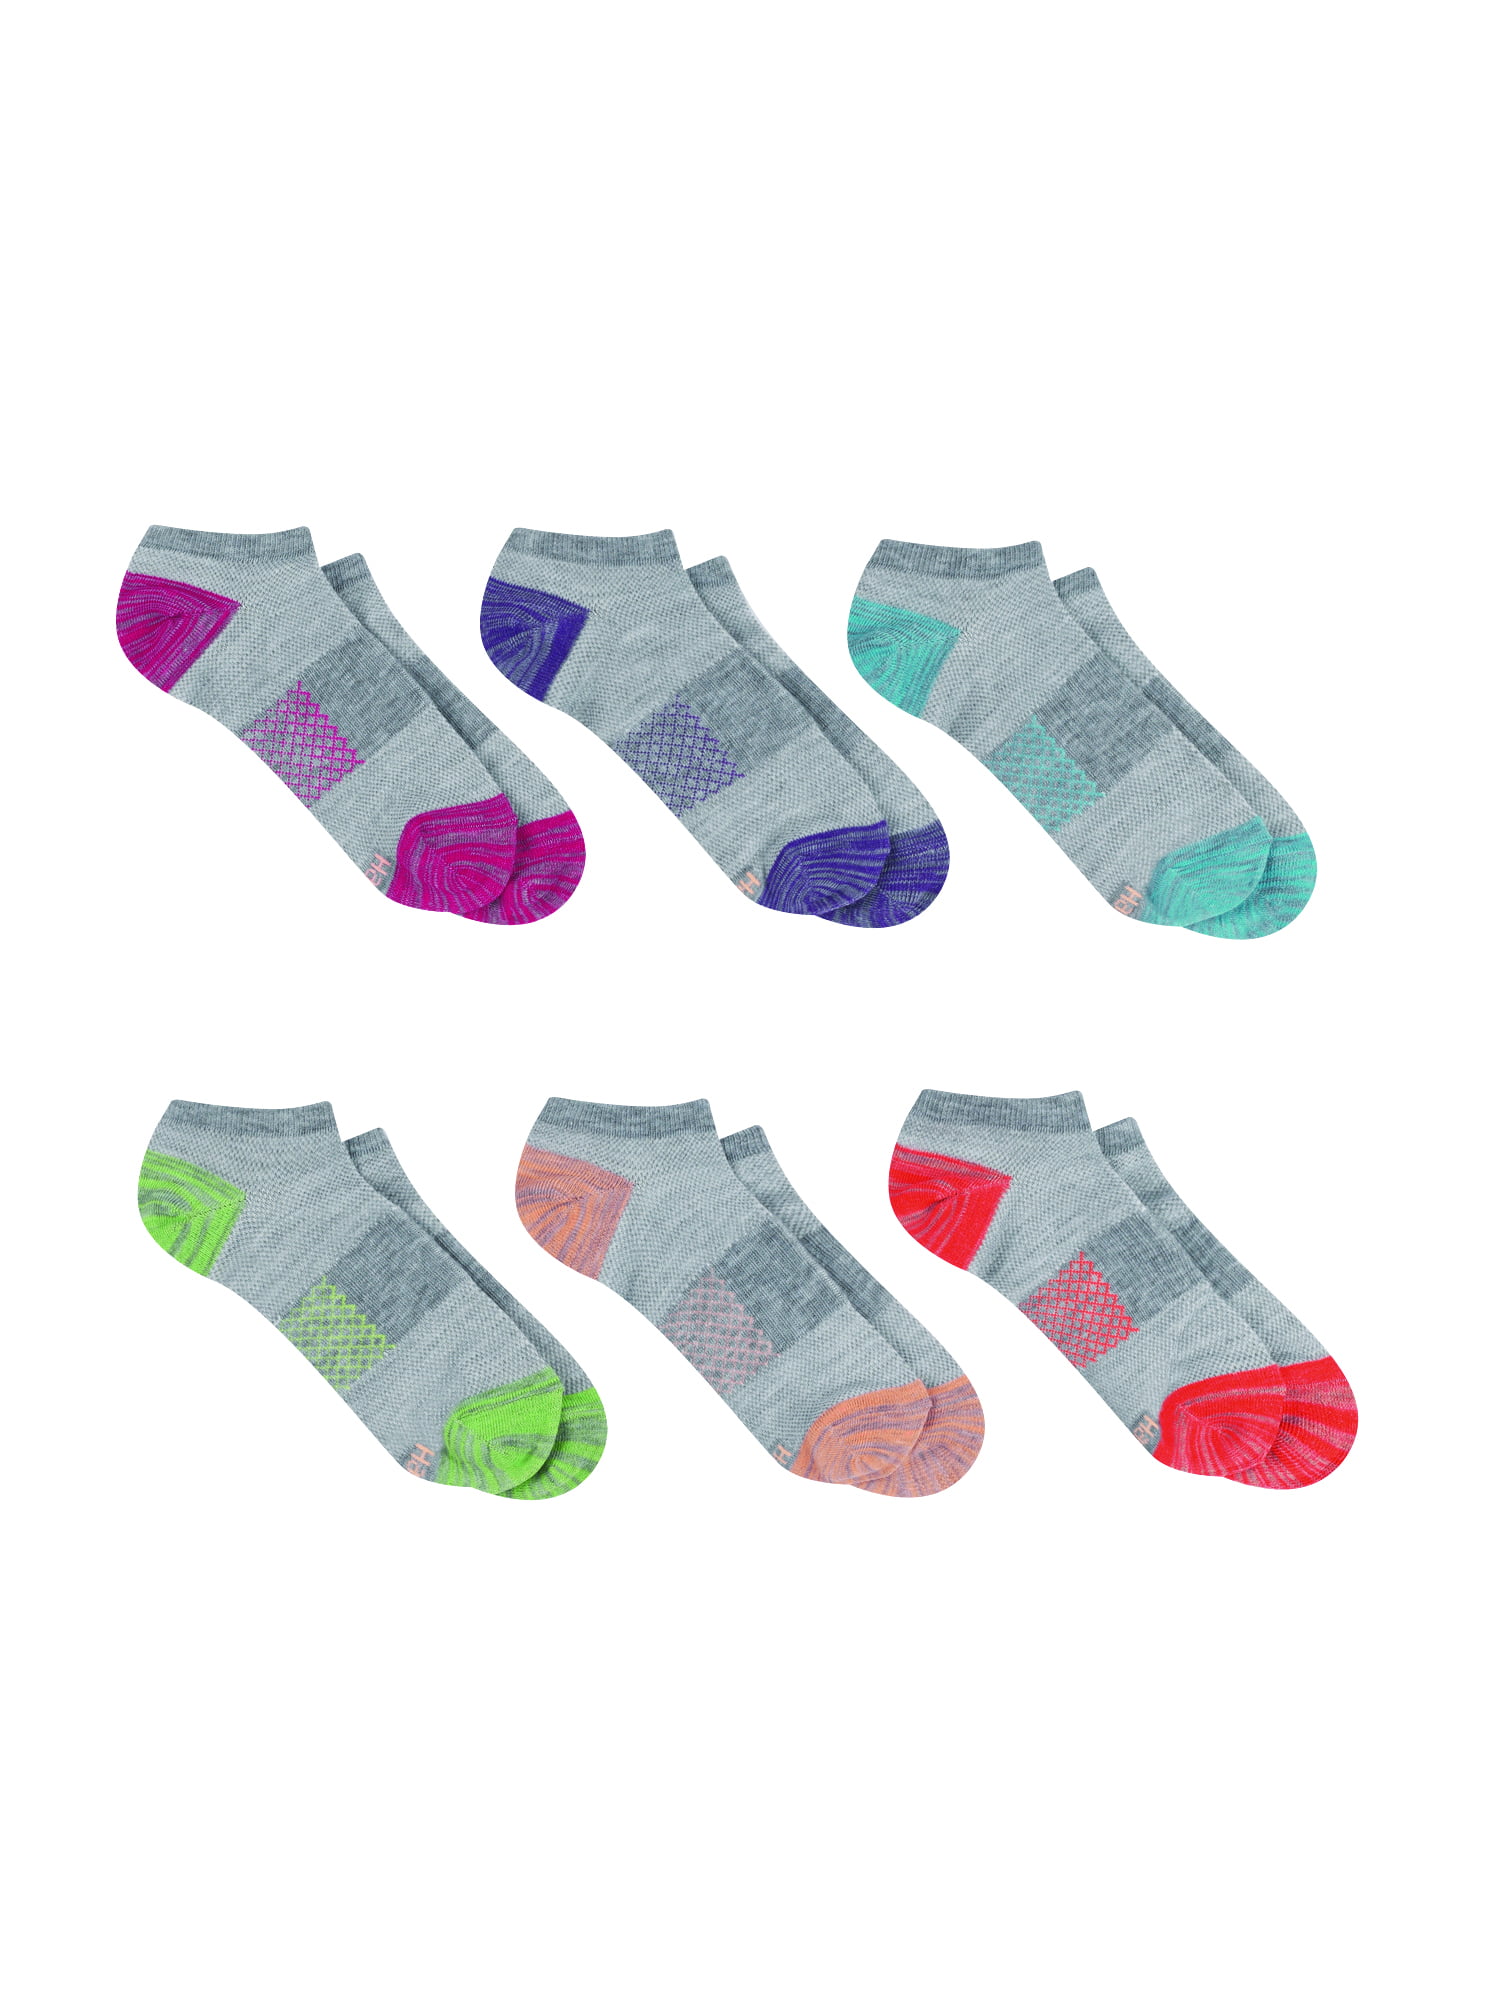 Hanes womens Lightweight Breathable Ventilation Ankle Socks 6-pair Pack 